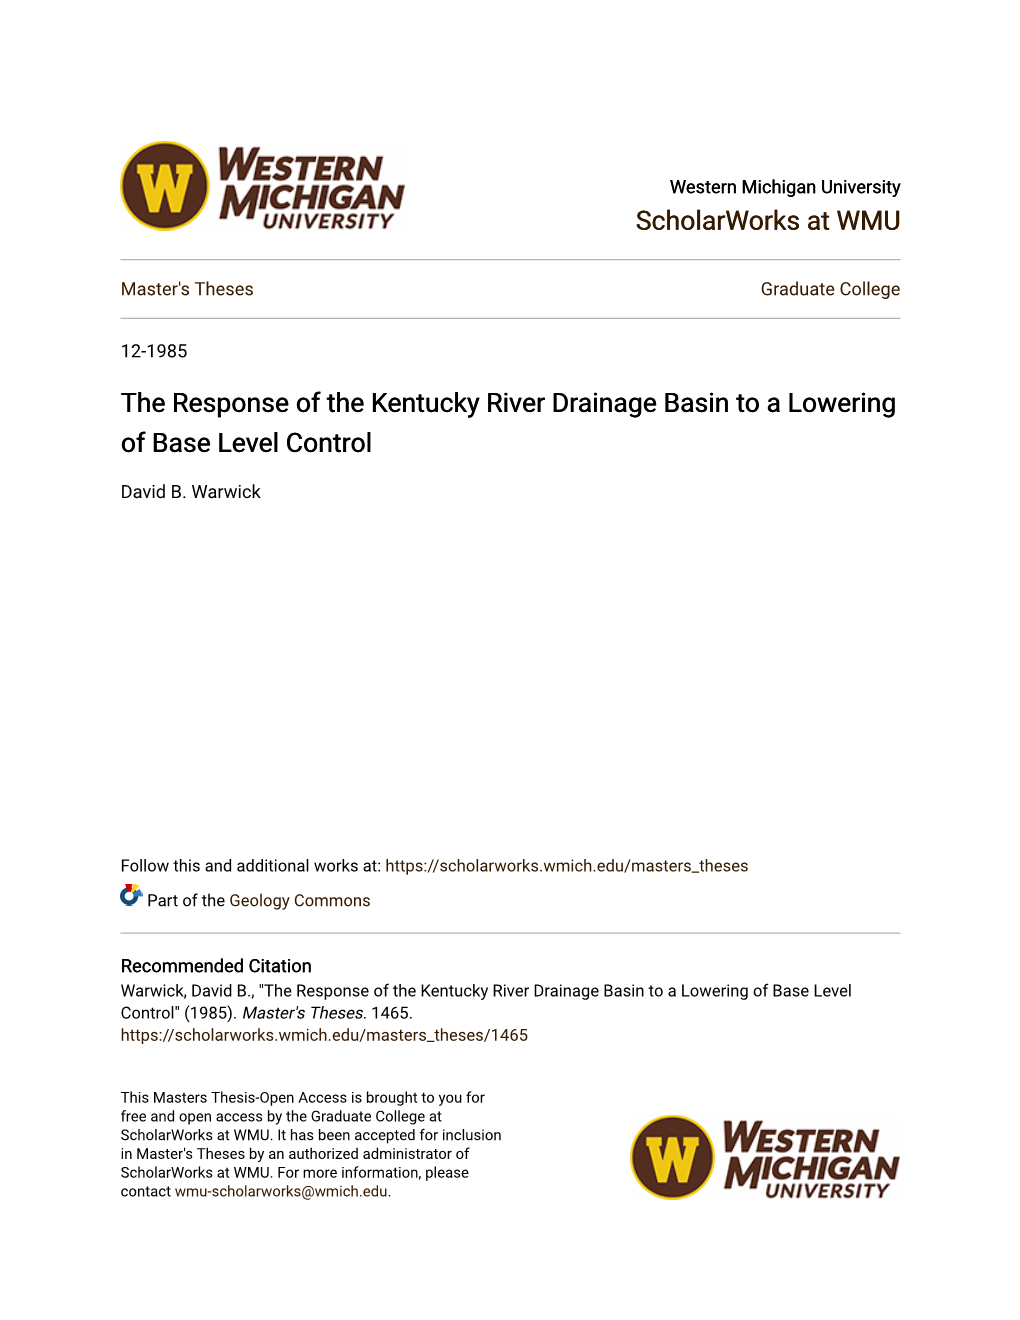 The Response of the Kentucky River Drainage Basin to a Lowering of Base Level Control